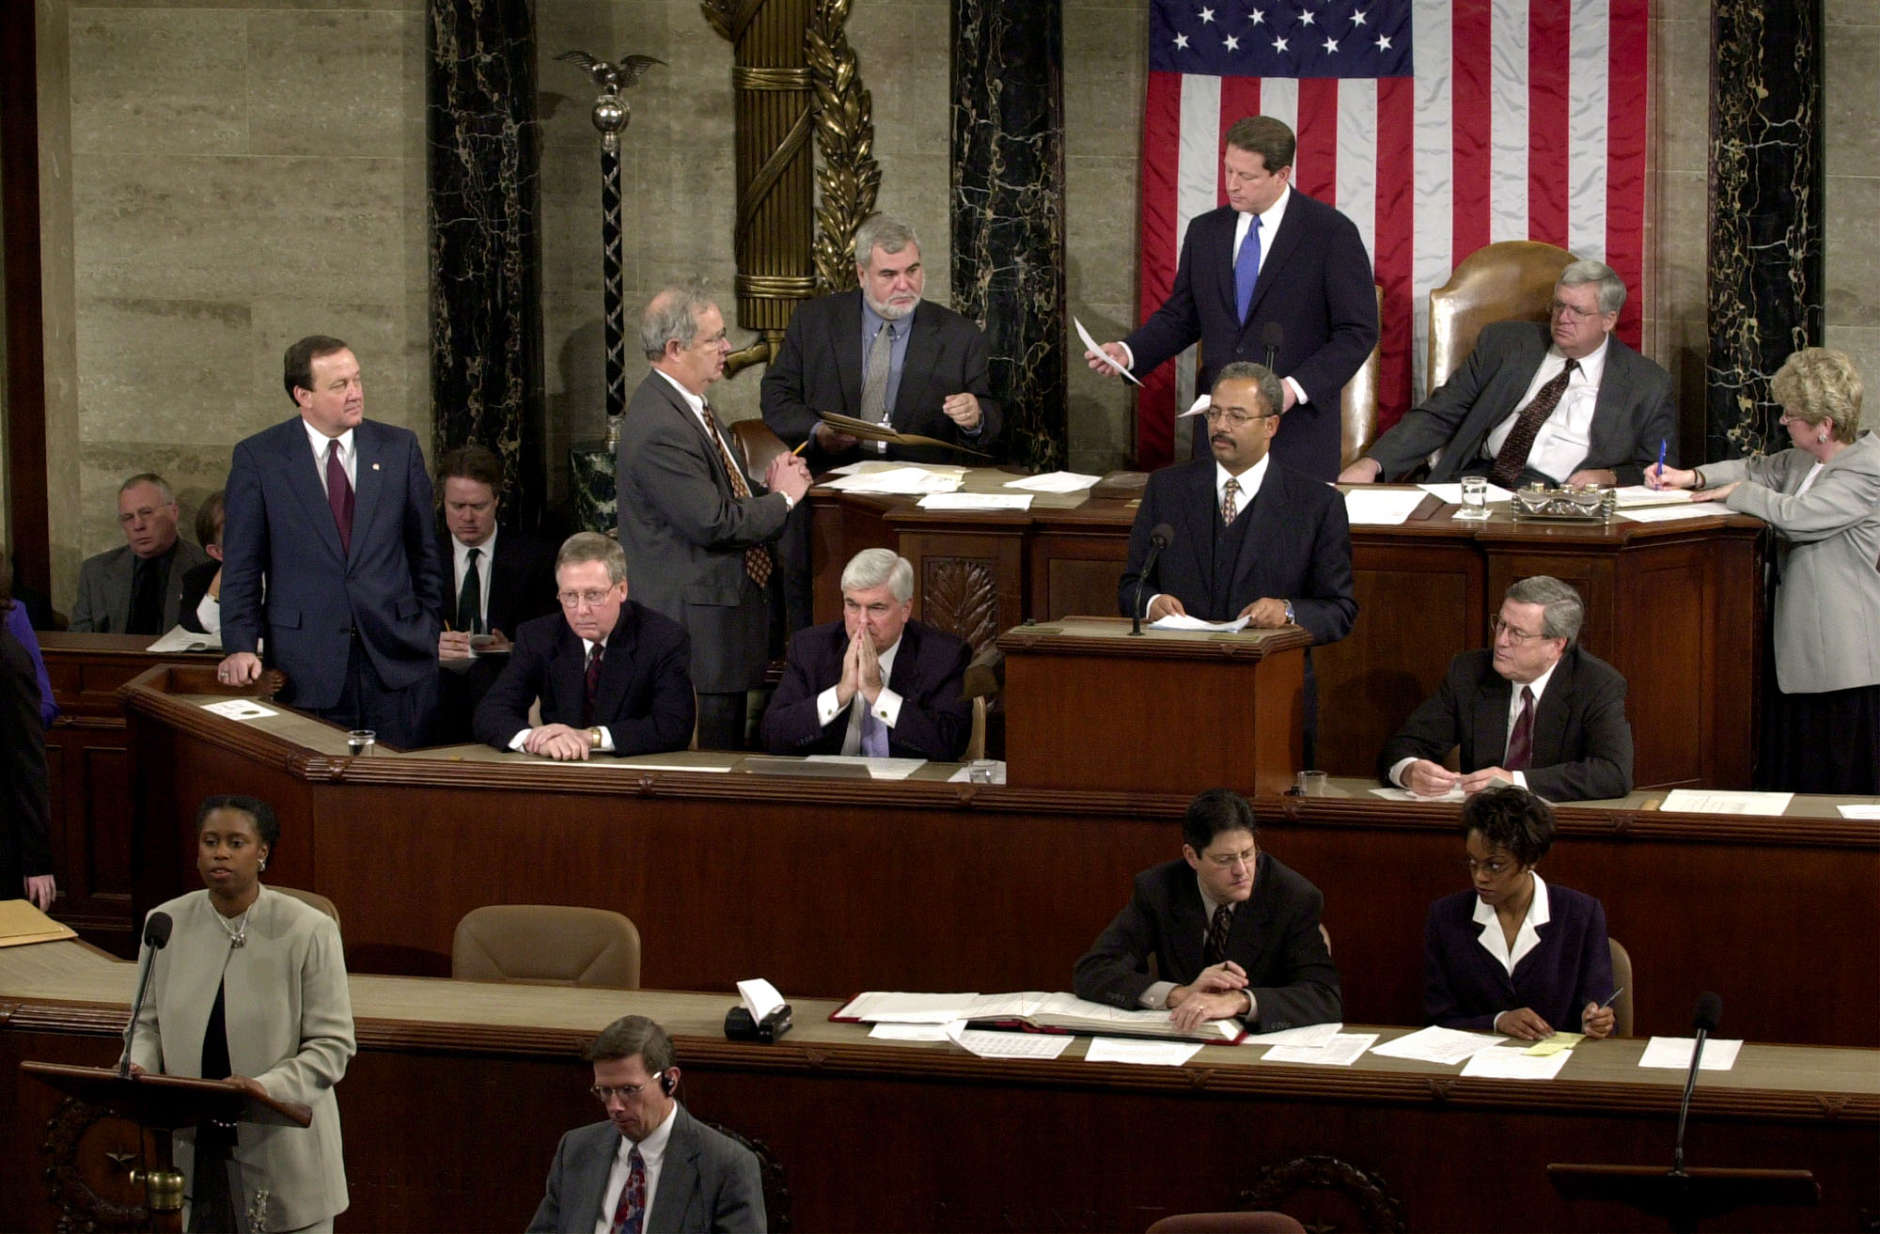 Rep. Cynthia McKinney, D-Ga., lower left, objects to Florida's electoral vote count results, as Vice President Al Gore, standing, top center, and House Speaker Dennis Hastert, R-Ill., seated, top right, listen on the floor of the U.S. House of Representatives, in Washington, Saturday, Jan. 6, 2001. Other members present, seated at left in middle row are: Sen. Mitch McConnell, R-Ky., Chris Dodd, D-Ct, hand over mouth., Chaka Fattah, D-Pa., standing at podium and Rep. William Thomas, R-Calif. Others not identified. Congress formally anointed George W. Bush on Saturday as the victor in last year's achingly close and bitterly contested presidential election. The Black Caucus walked out of the ceremony on Capitol Hill in protest of the results that gave the presidential election to Texas Gov. George W. Bush over Vice President Al Gore.  (AP Photo/Kenneth Lambert)